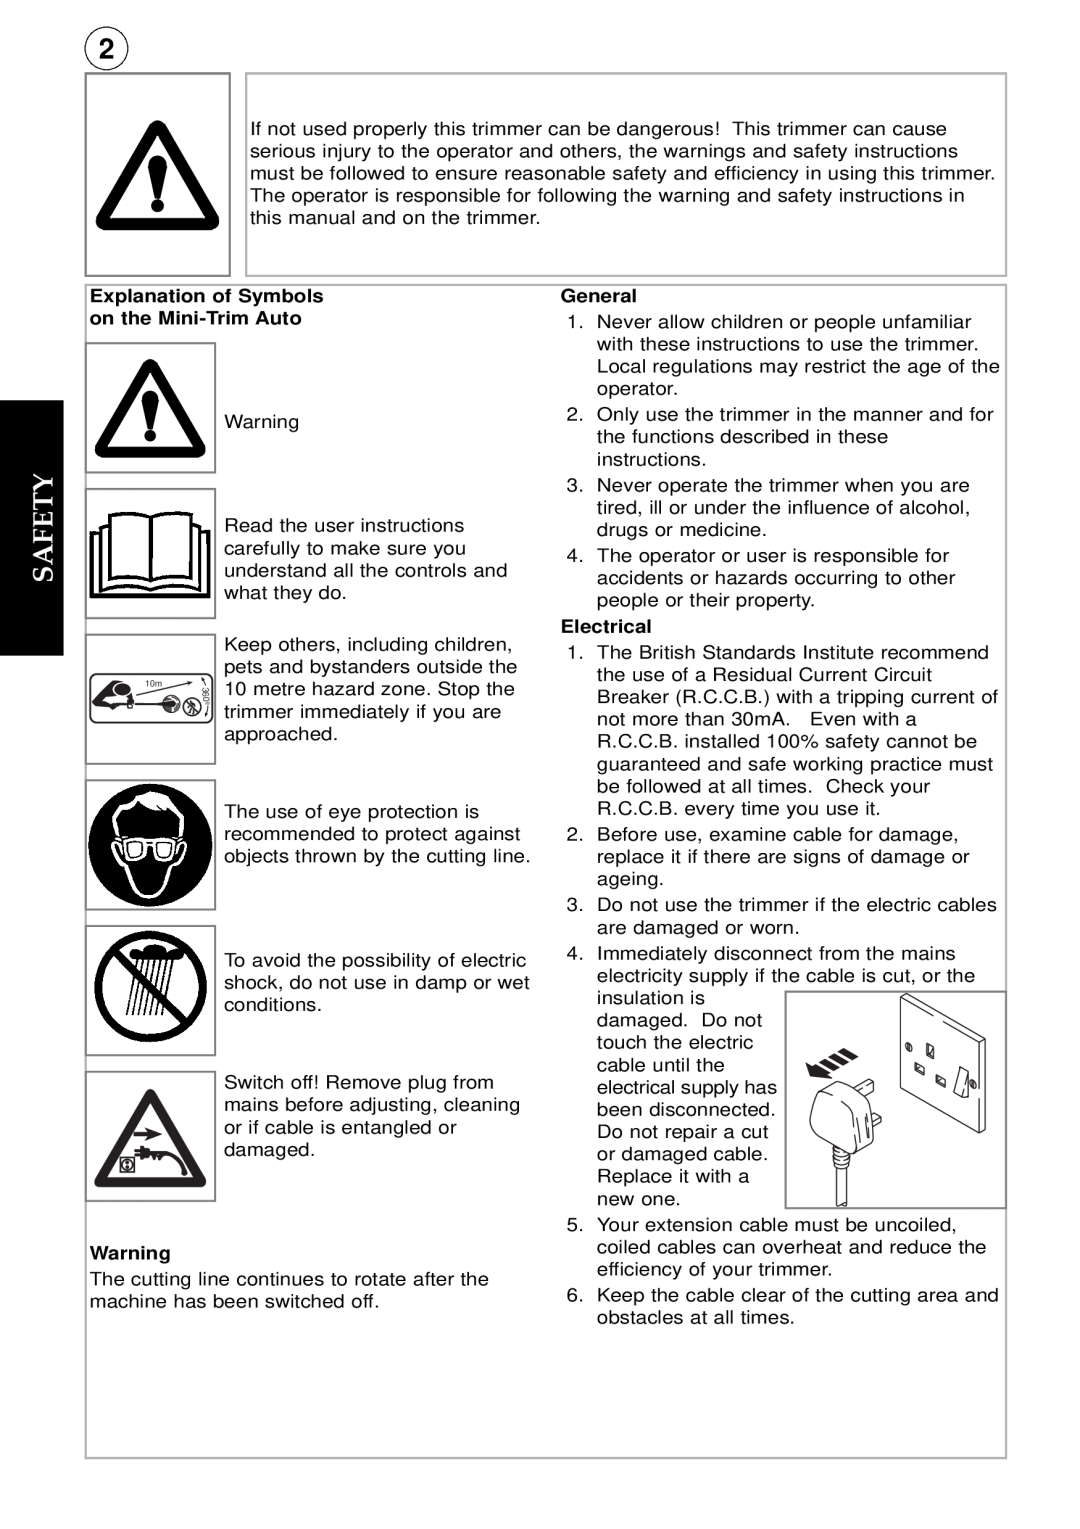 Flymo instruction manual Safety, Explanation of Symbols on the Mini-Trim Auto, General, Electrical 